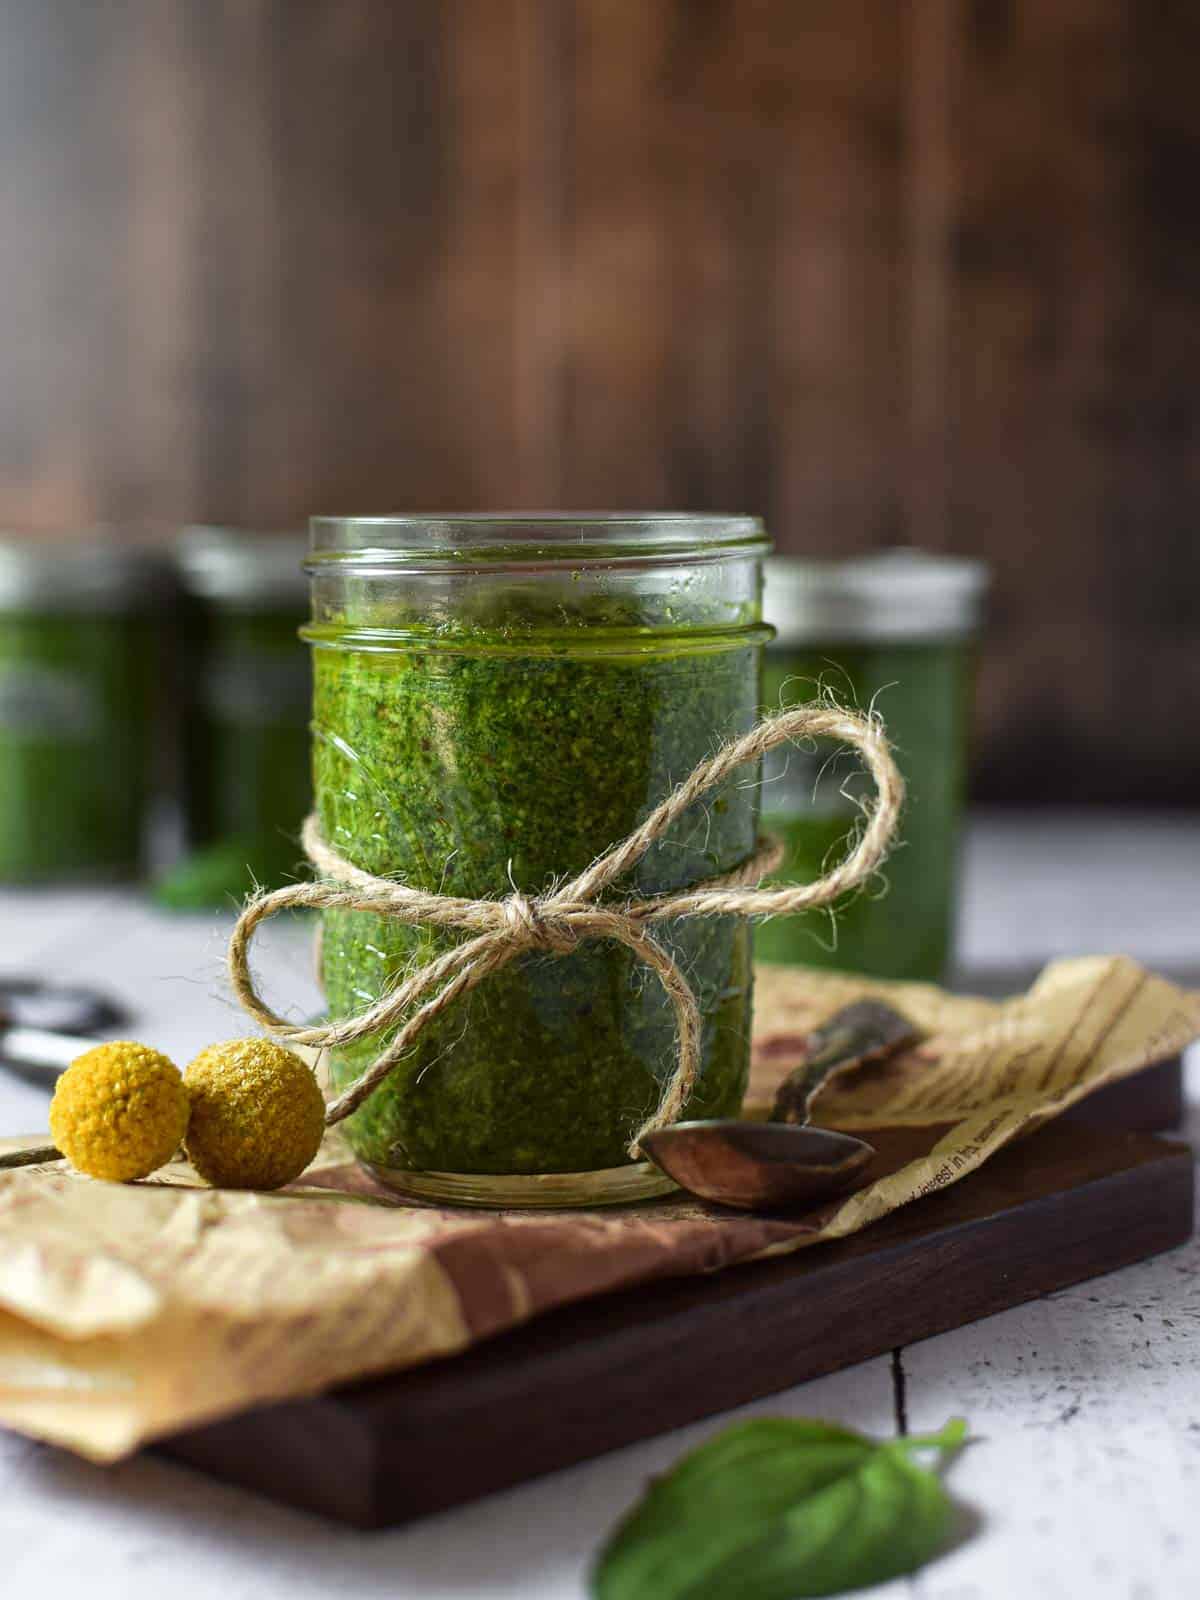 Eye-level view of pesto sauce in a clear jar on a wooden surface.